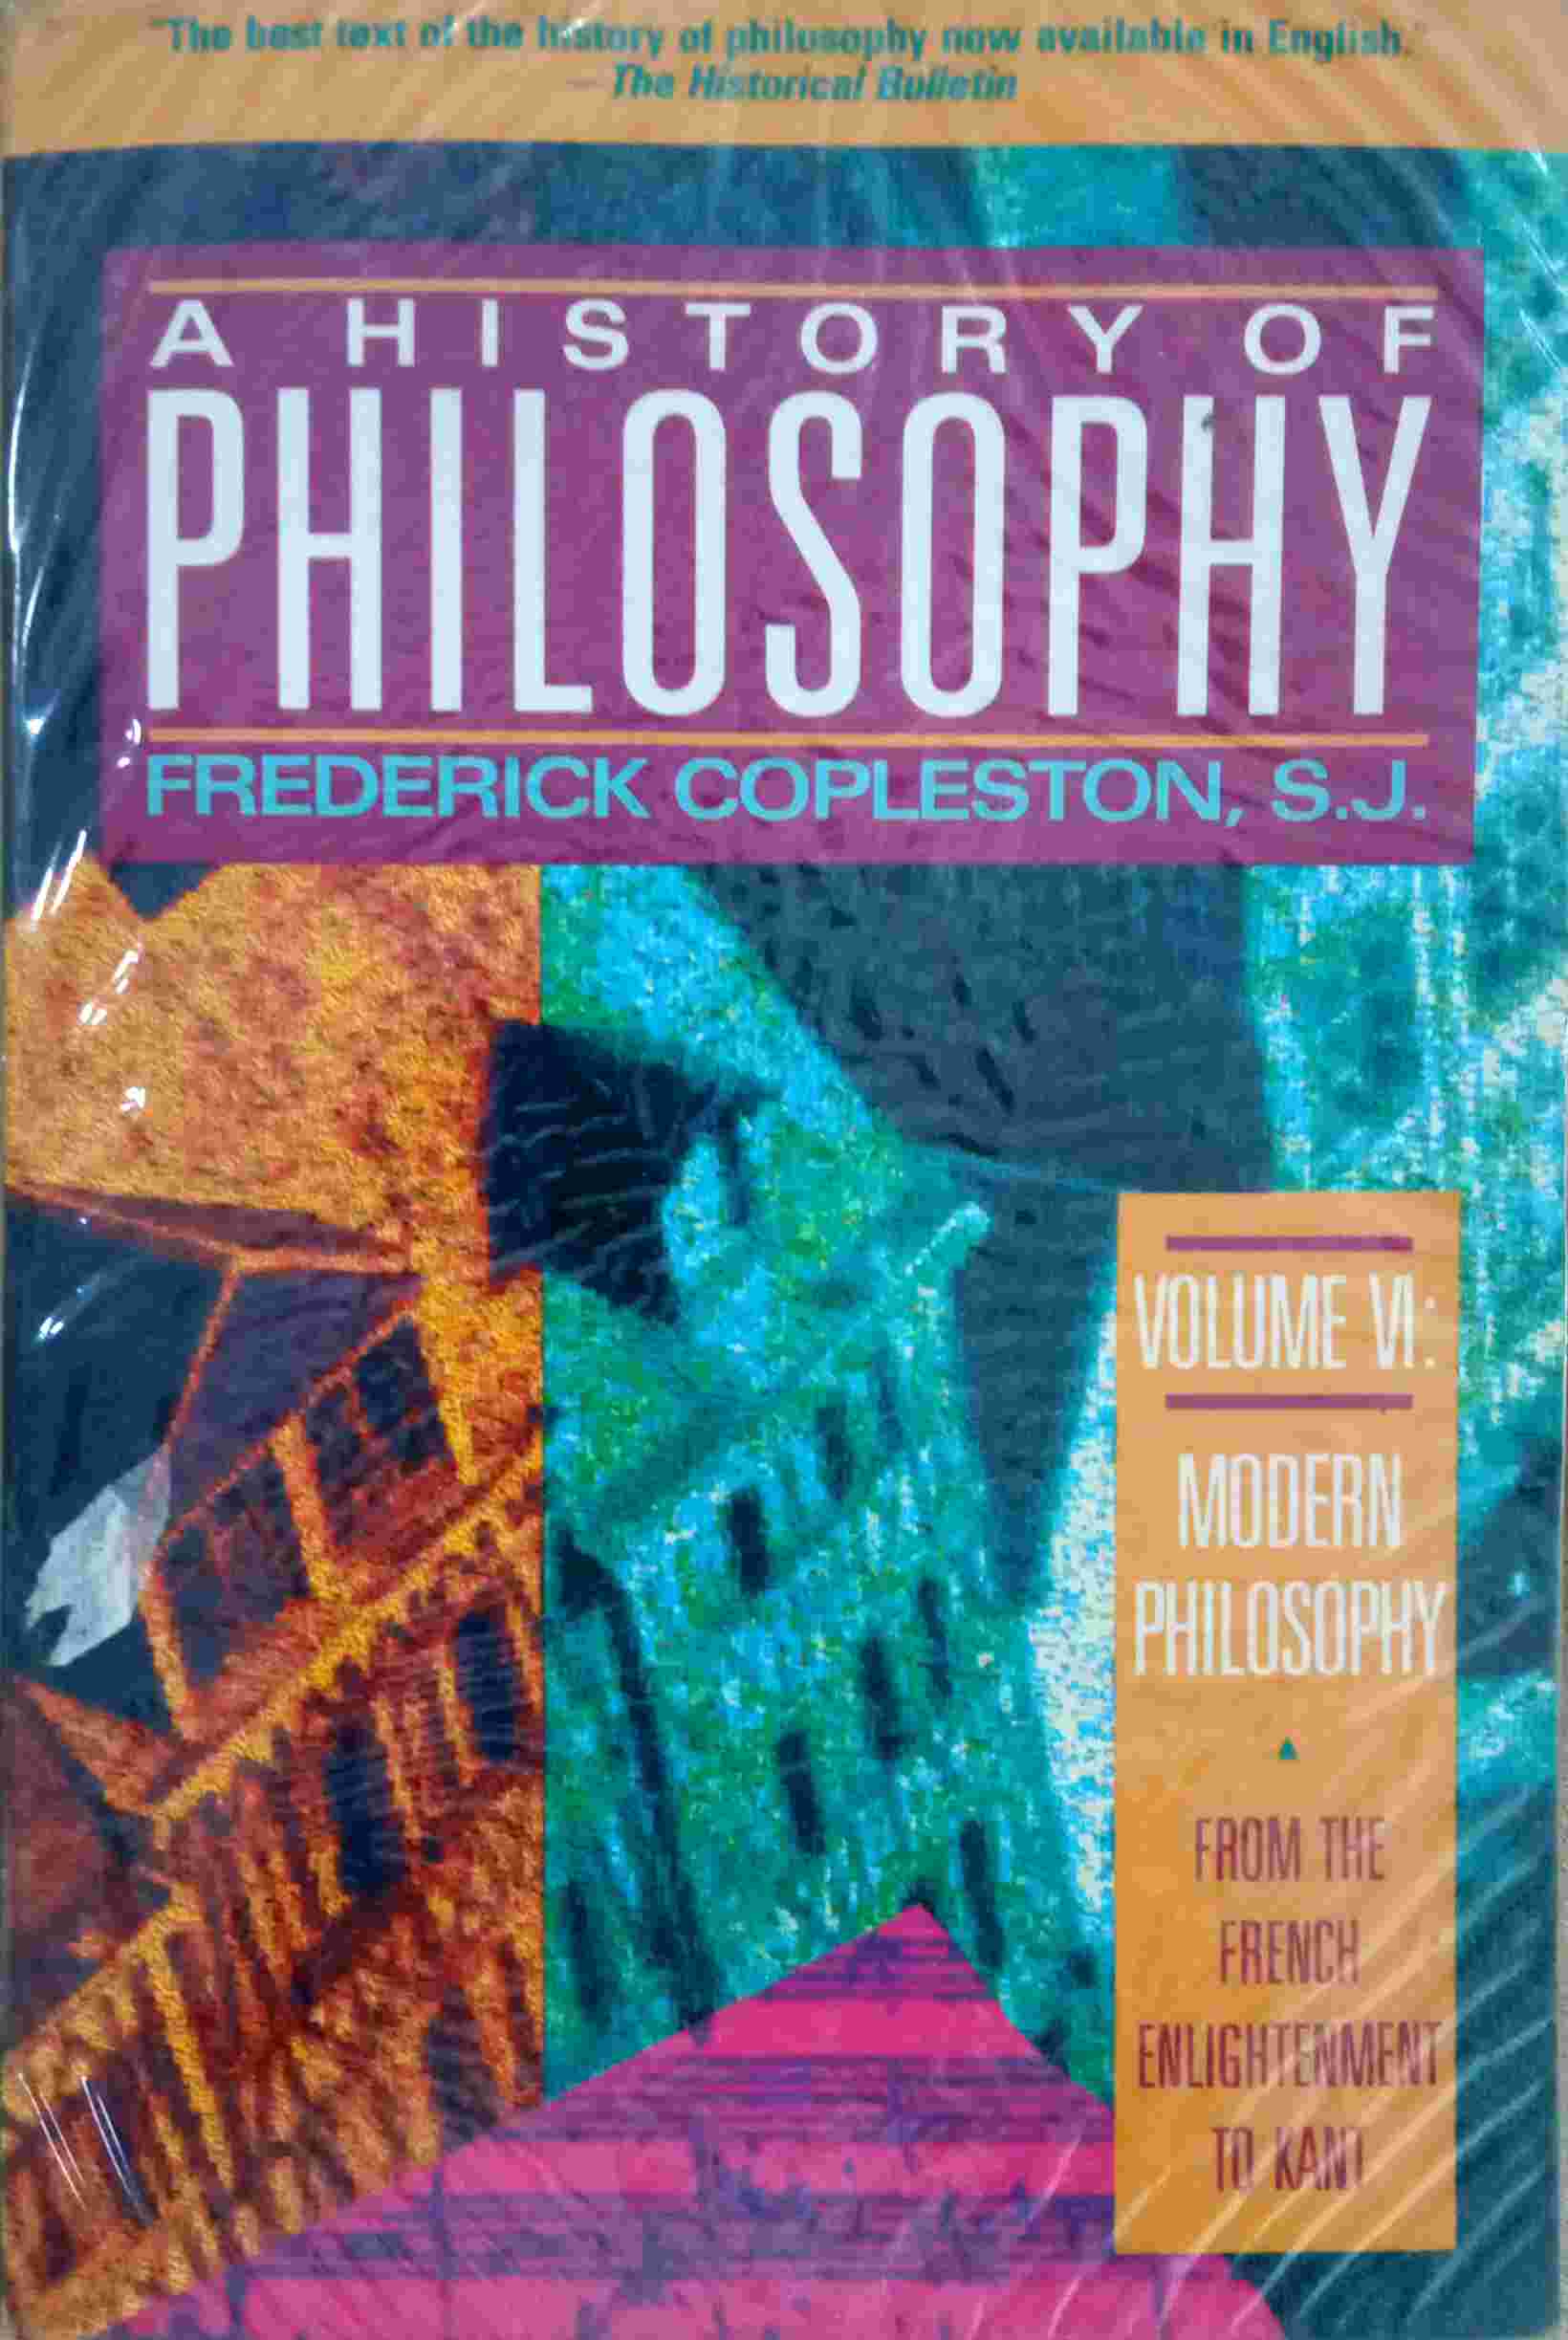 A HISTORY OF PHILOSOPHY: MODERN PHILOSOPHY: FROM THE FRENCH ENLIGHTENMENT TO KANT